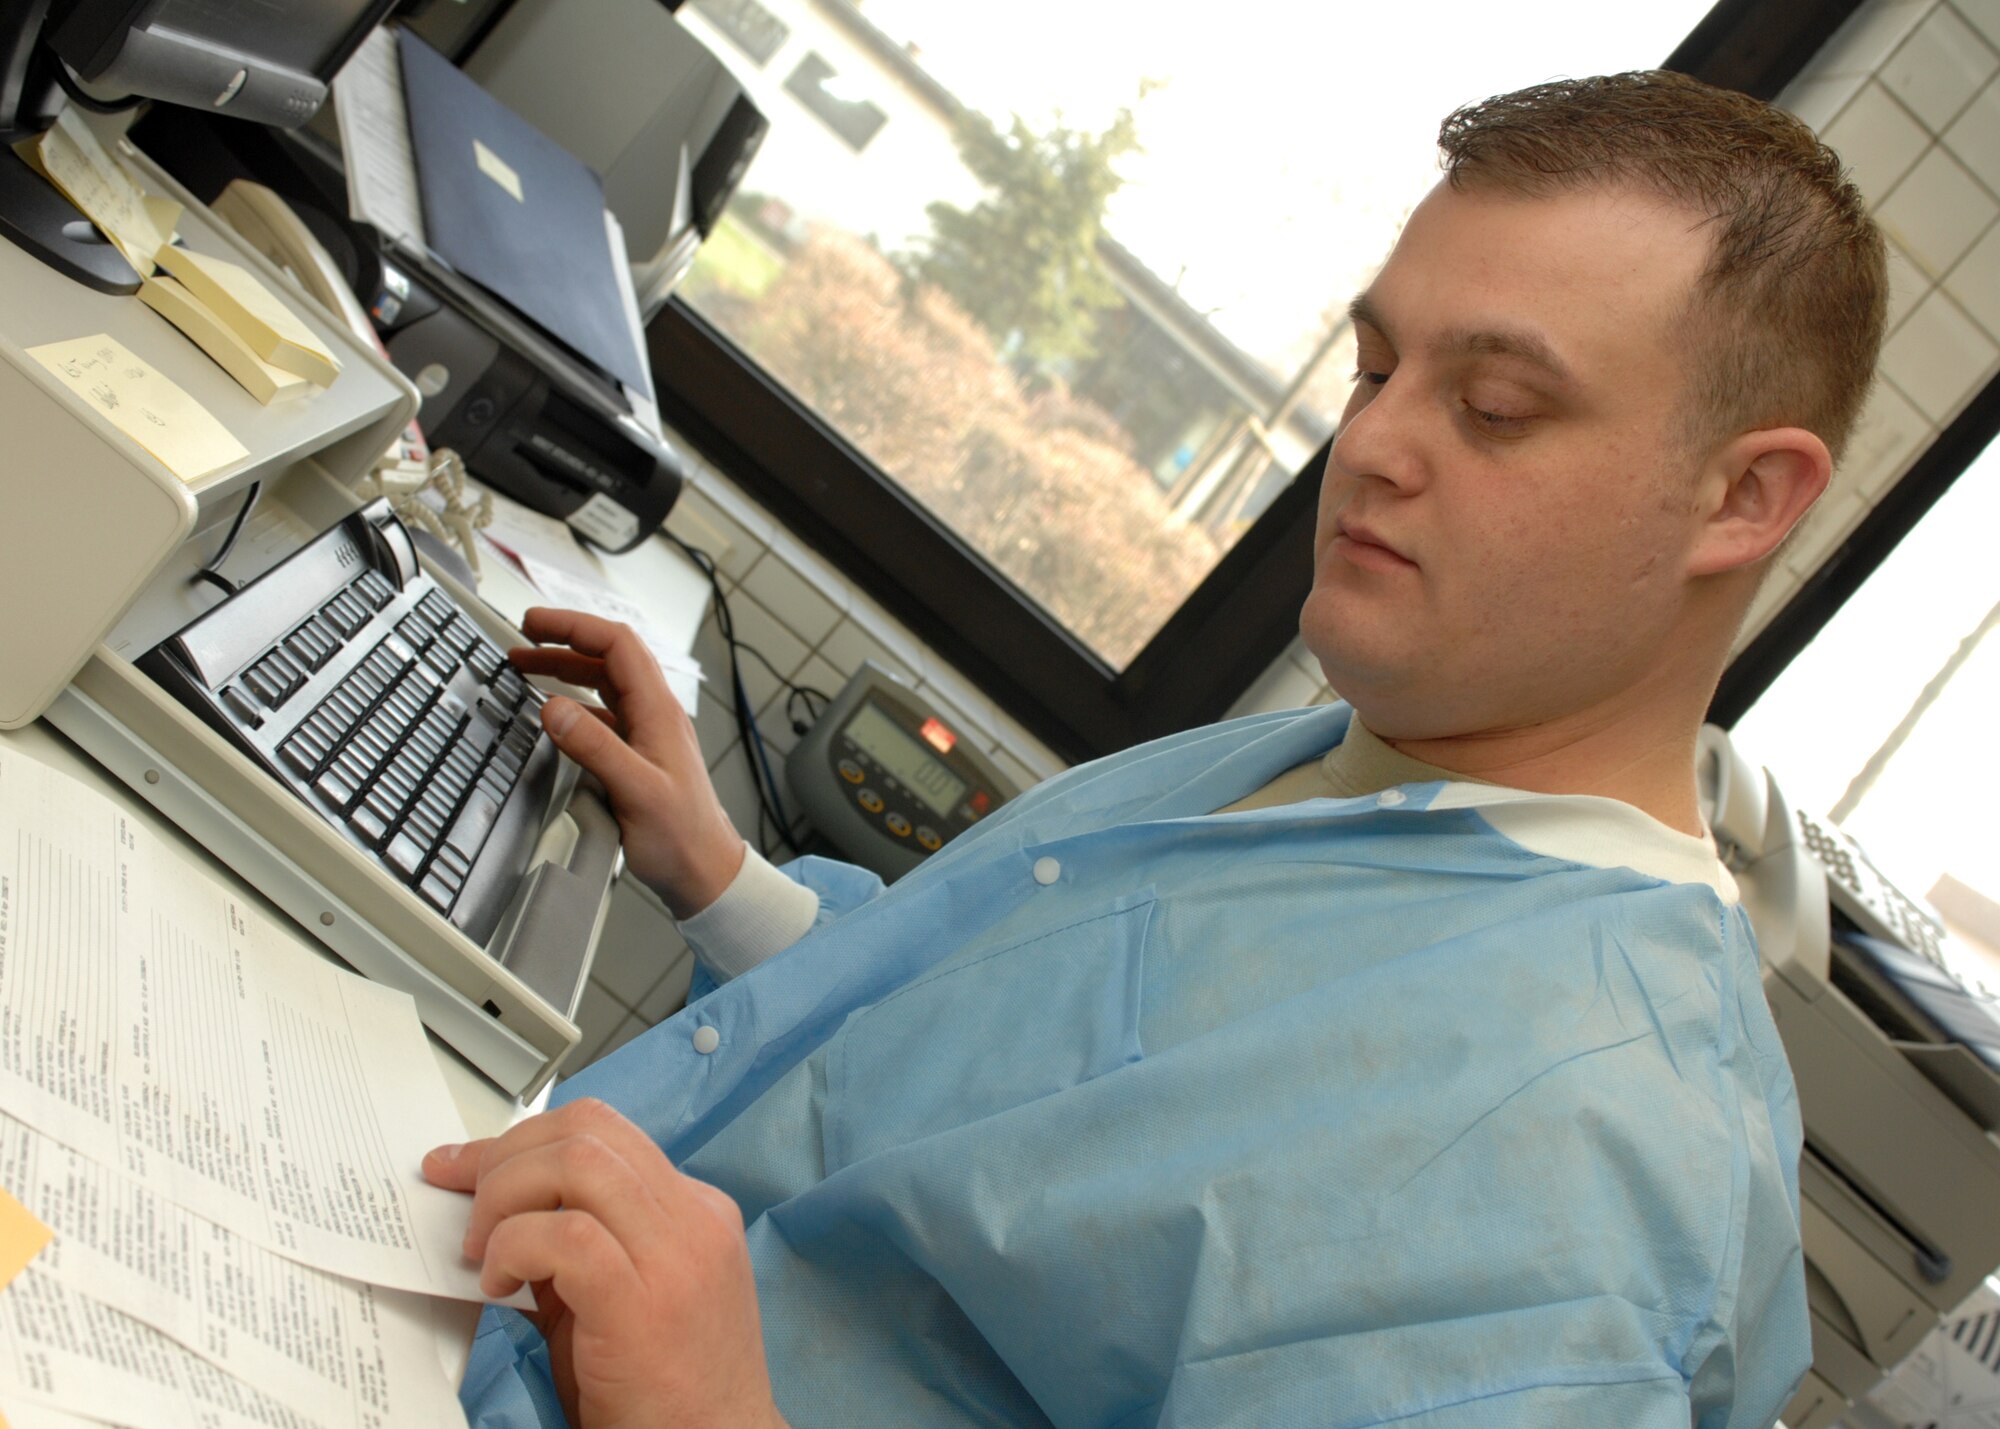 BITBURG AIR BASE, Germany- Senior Airman Charles Crow, 52nd Medical Support Squadron, enters test data into a computer system at the Bitburg Laboratory April 15, 2008. Lab technicians around the nation are honored for their contribution to the medical community during National Medical Laboratory Professionals Week April 20-26. (U.S. Air Force photo/Airman 1st Class Jenifer Calhoun)